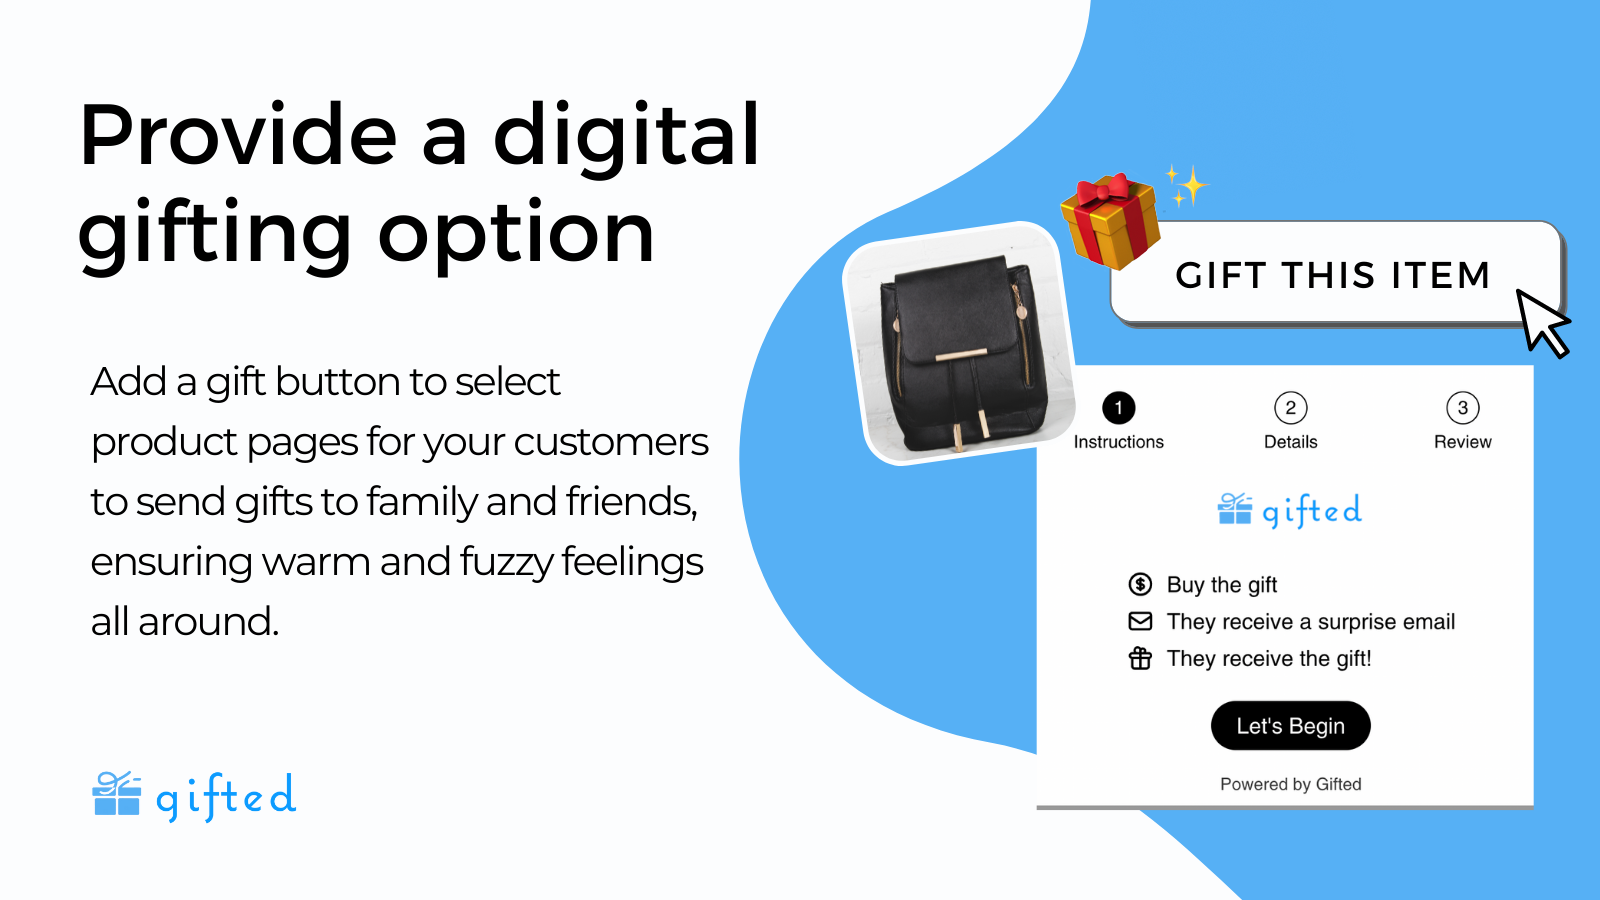 Gift button is added to select product pages